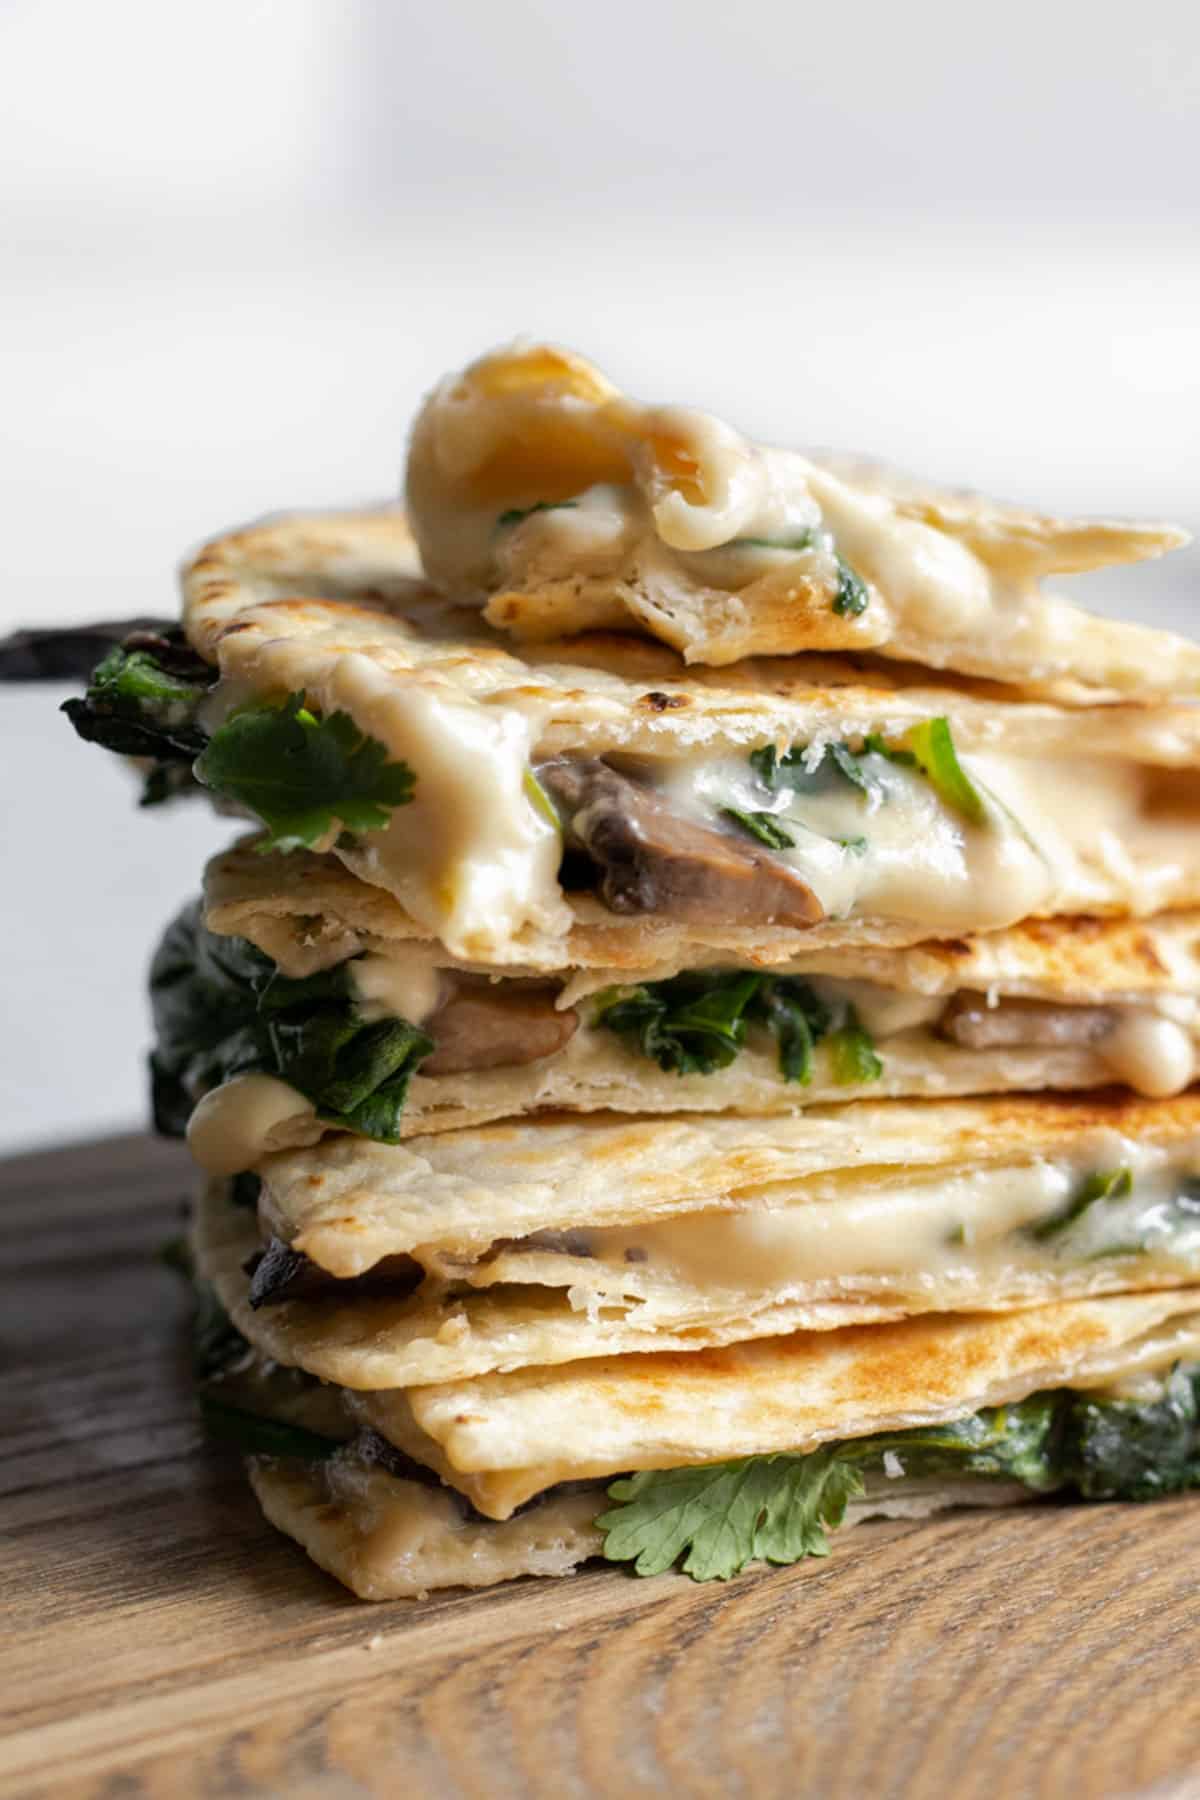 melted cashew cheese, spinach and mushrooms inside vegan quesadillas.